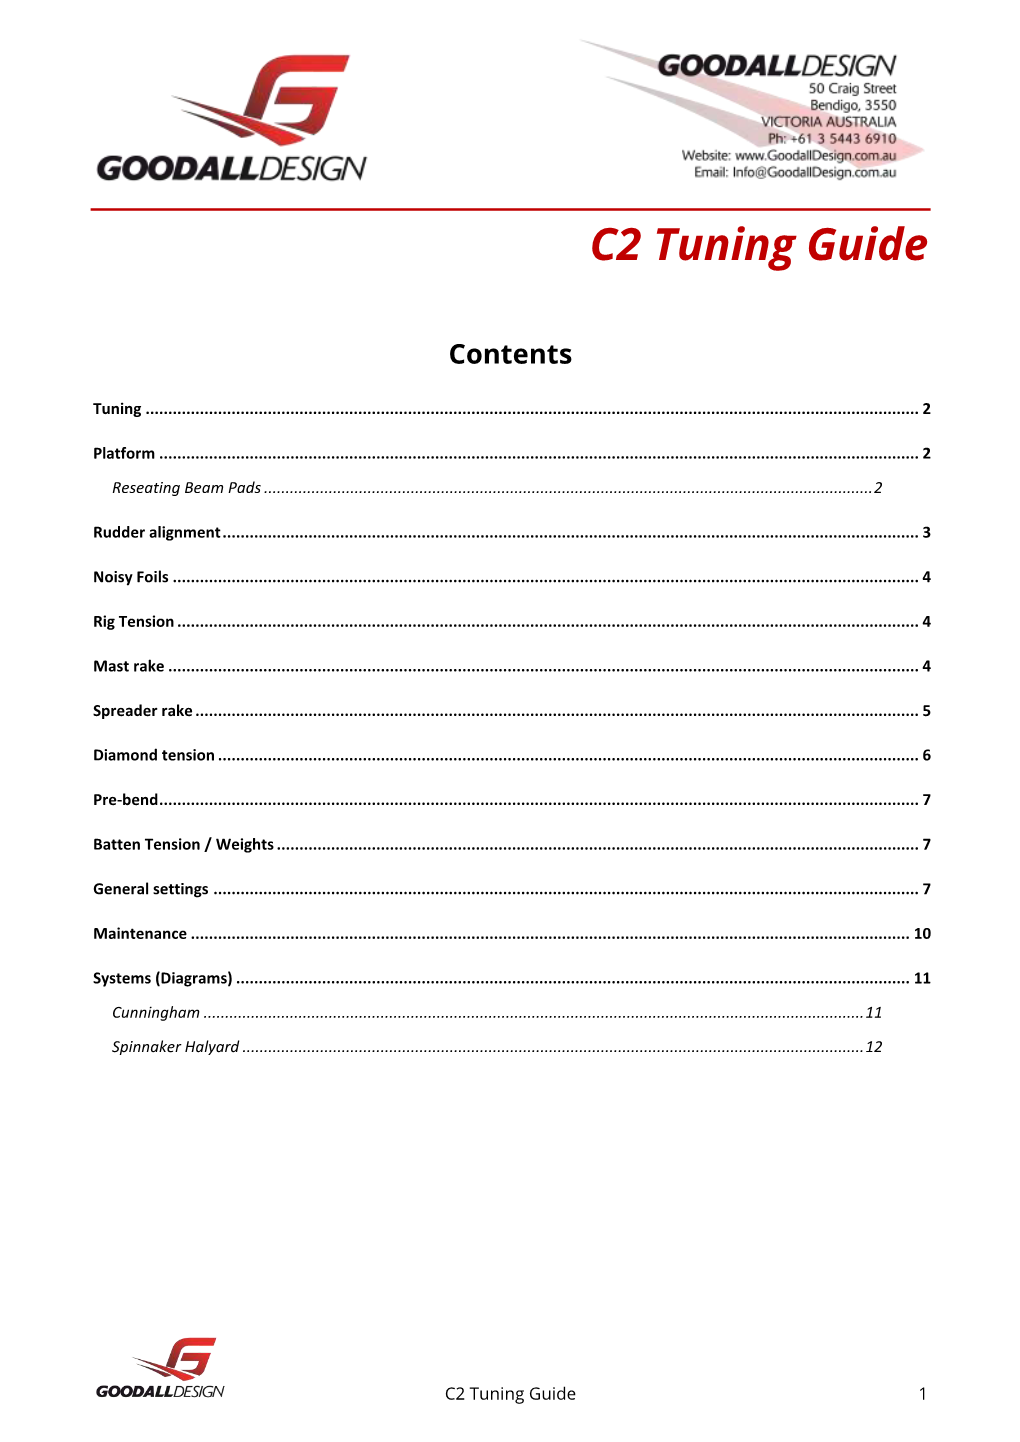 C2 Tuning Guide